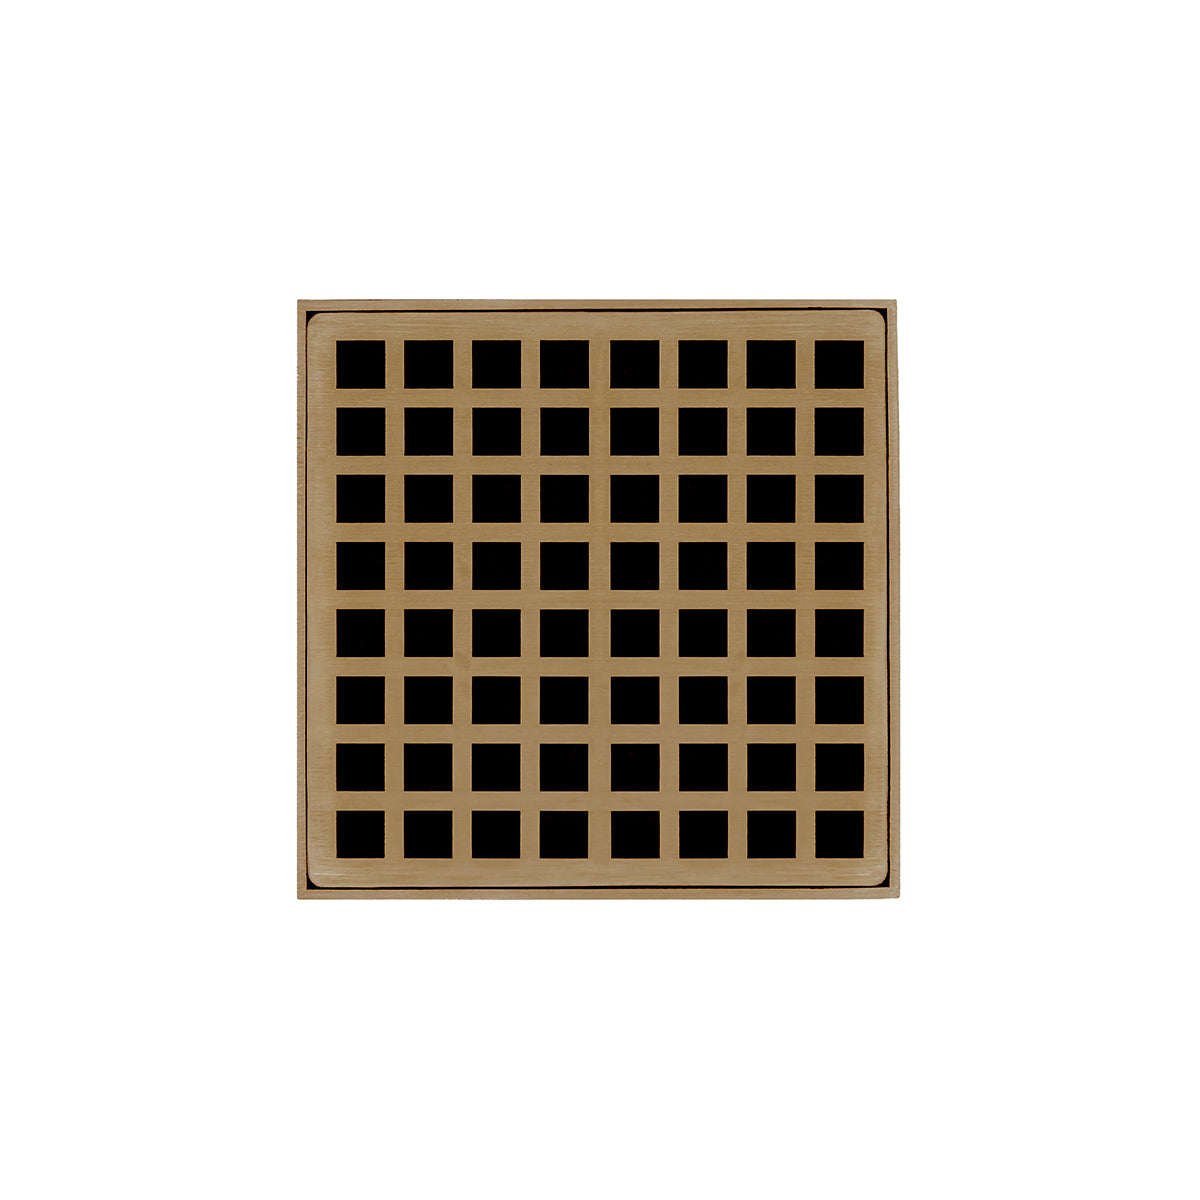 Infinity Drain 5" x 5" QDB 5 Premium Center Drain Kit with Squares Pattern Decorative Plate with ABS Bonded Flange Drain Body, 2", 3" and 4" Outlet